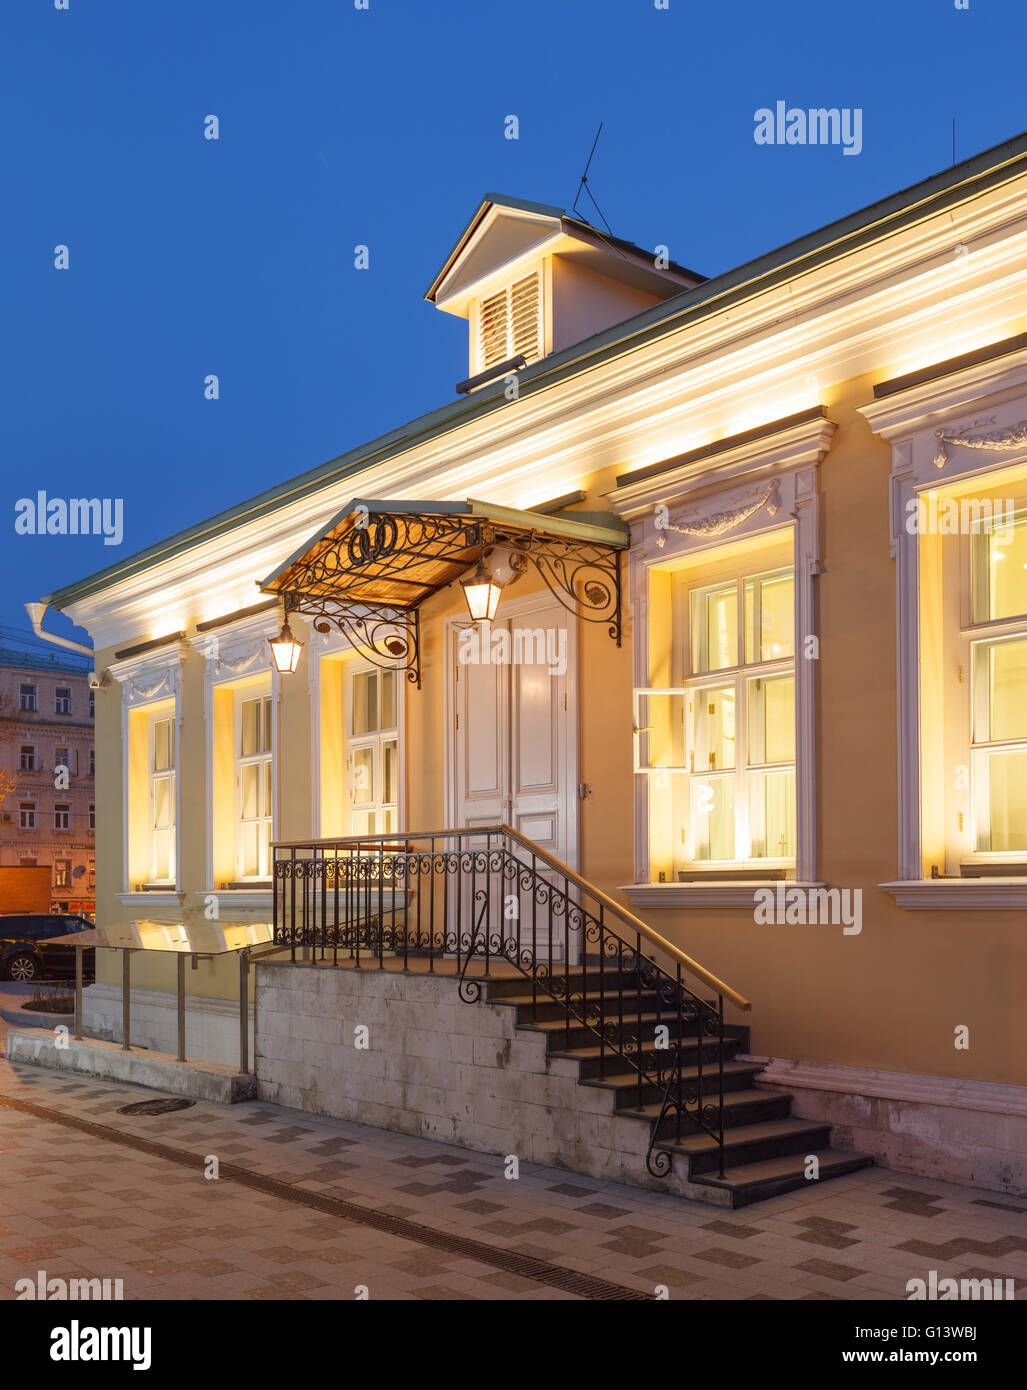 A single storey building in classical palladio style with yellow walls and evening architectural lighting. Moscow, Russia Stock Photo